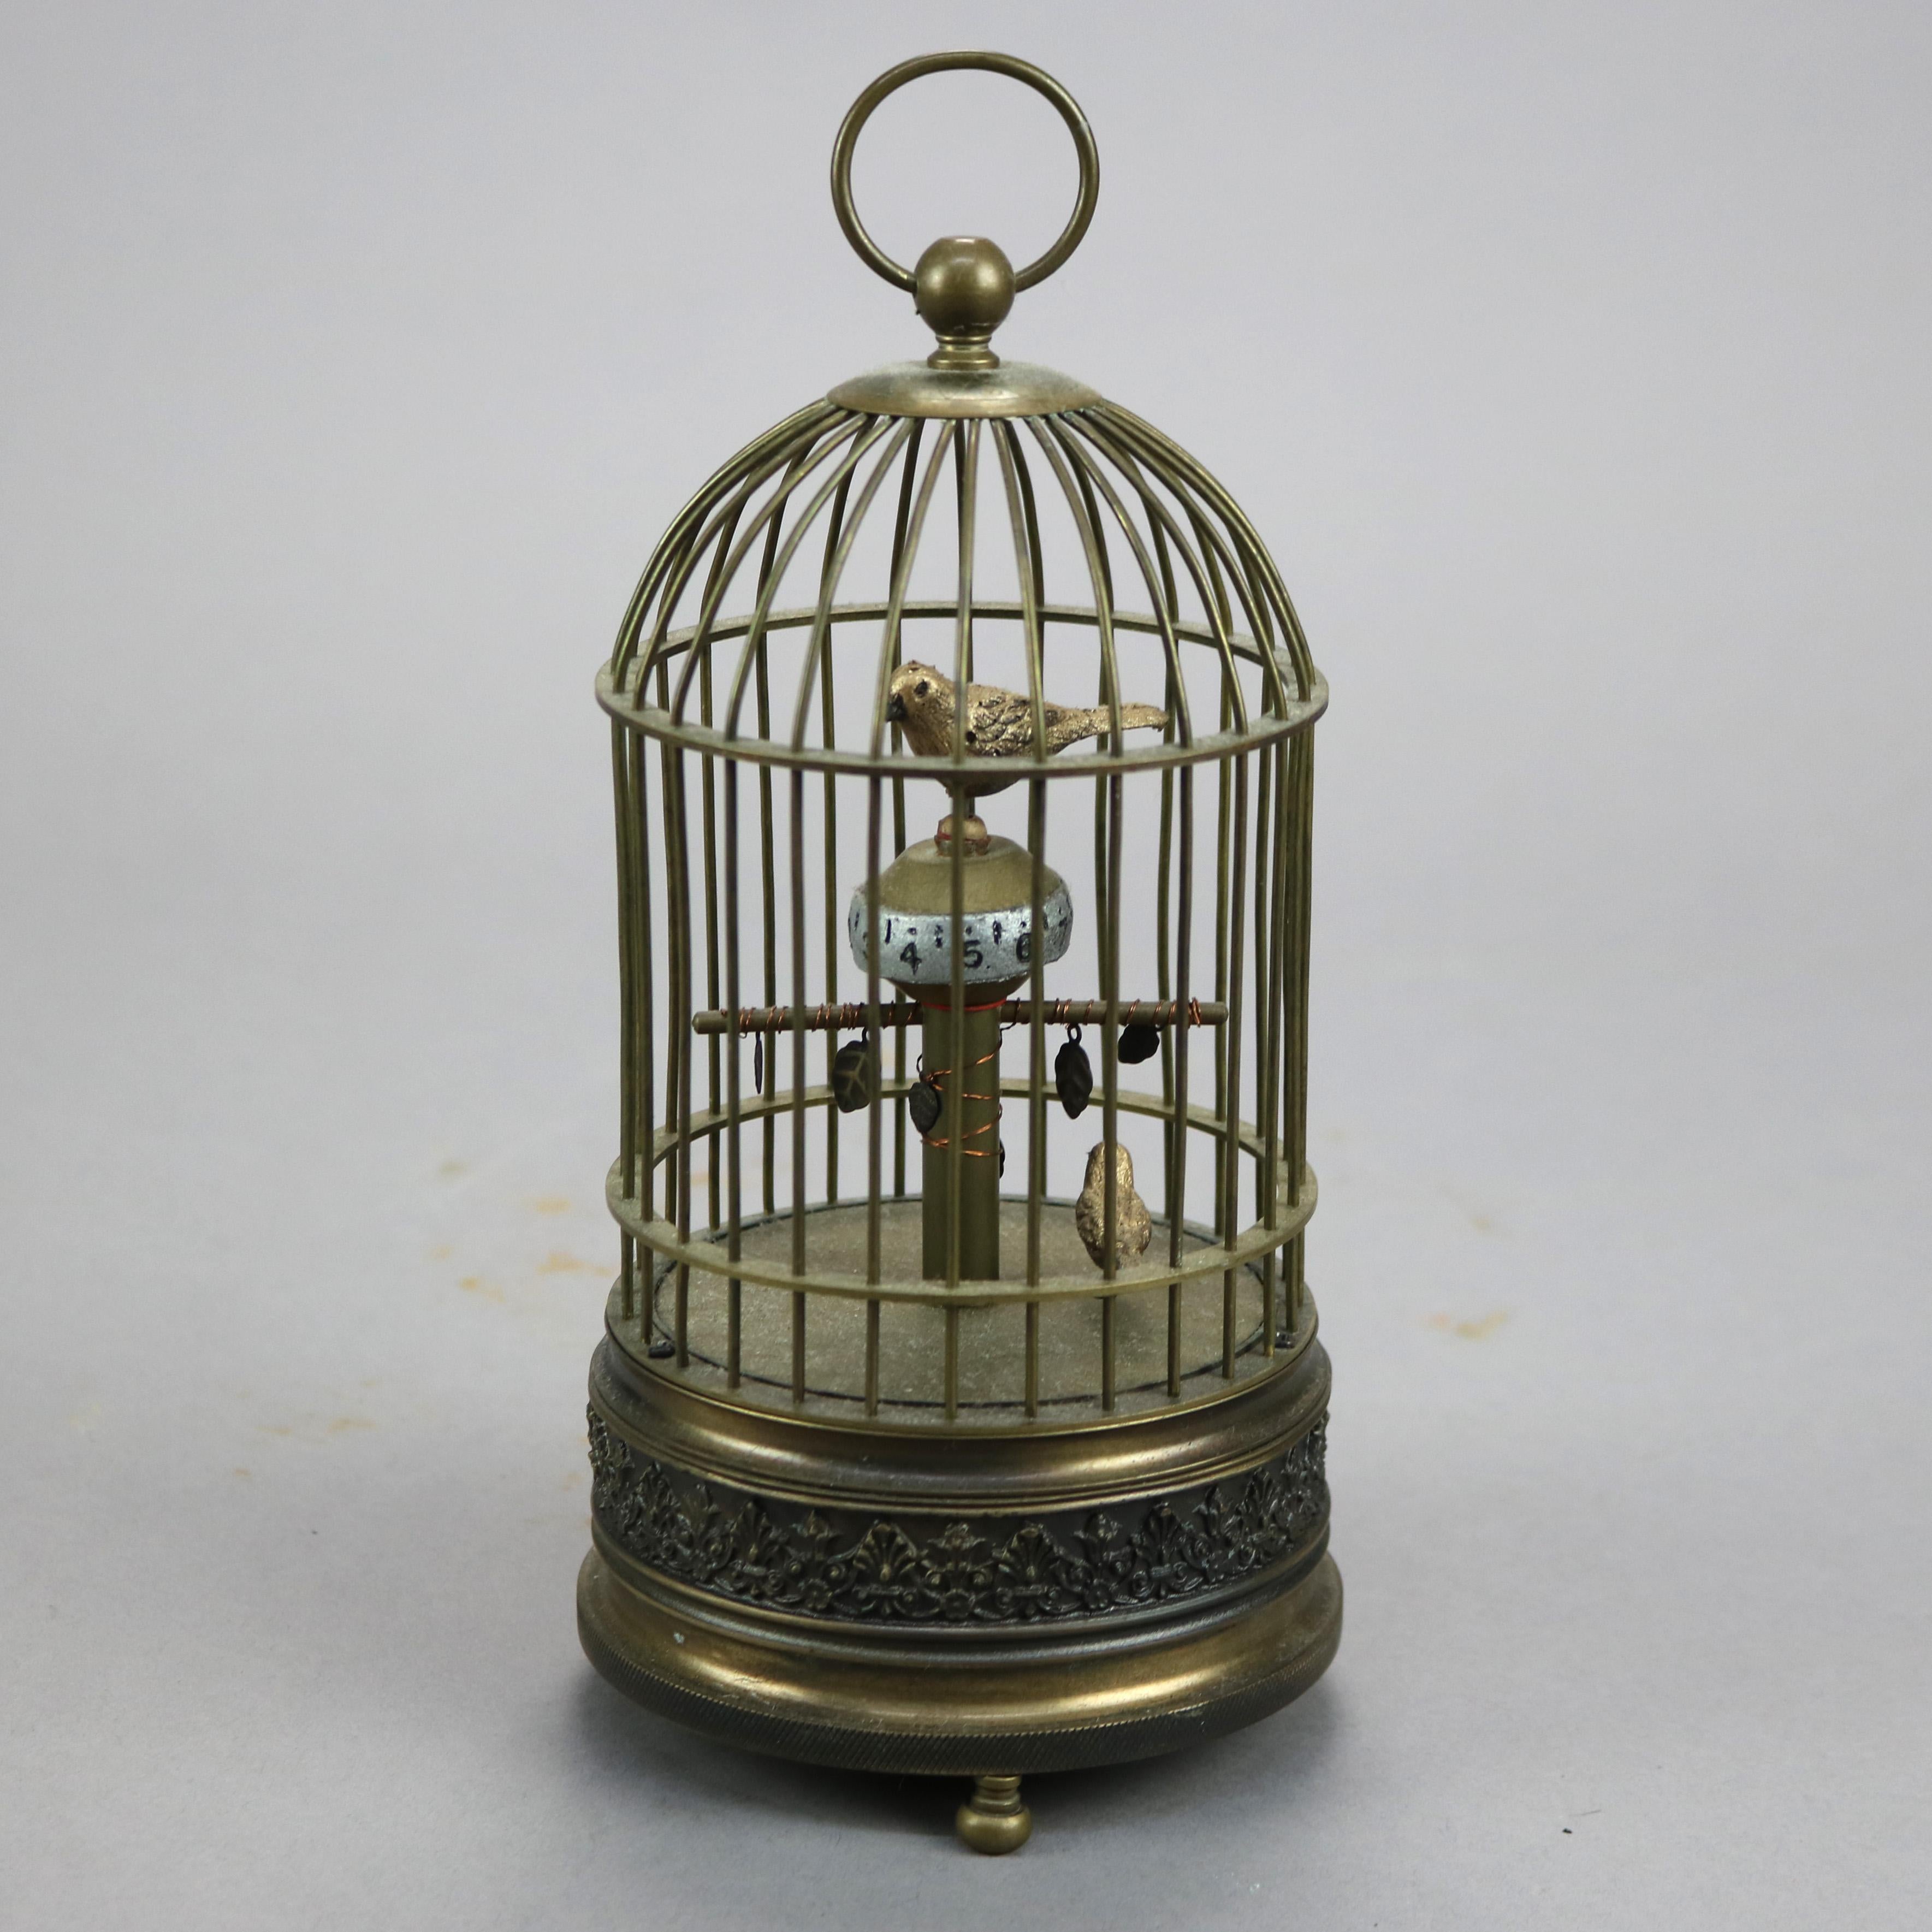 An antique figural desk clock offers brass construction with birds (finches) in cage having foliate embossed base, lower bird acts as the pendulum while upper bird spins with the time, wind-up, c1910

Measures- 8.5'' H x 4'' W x 4'' D.